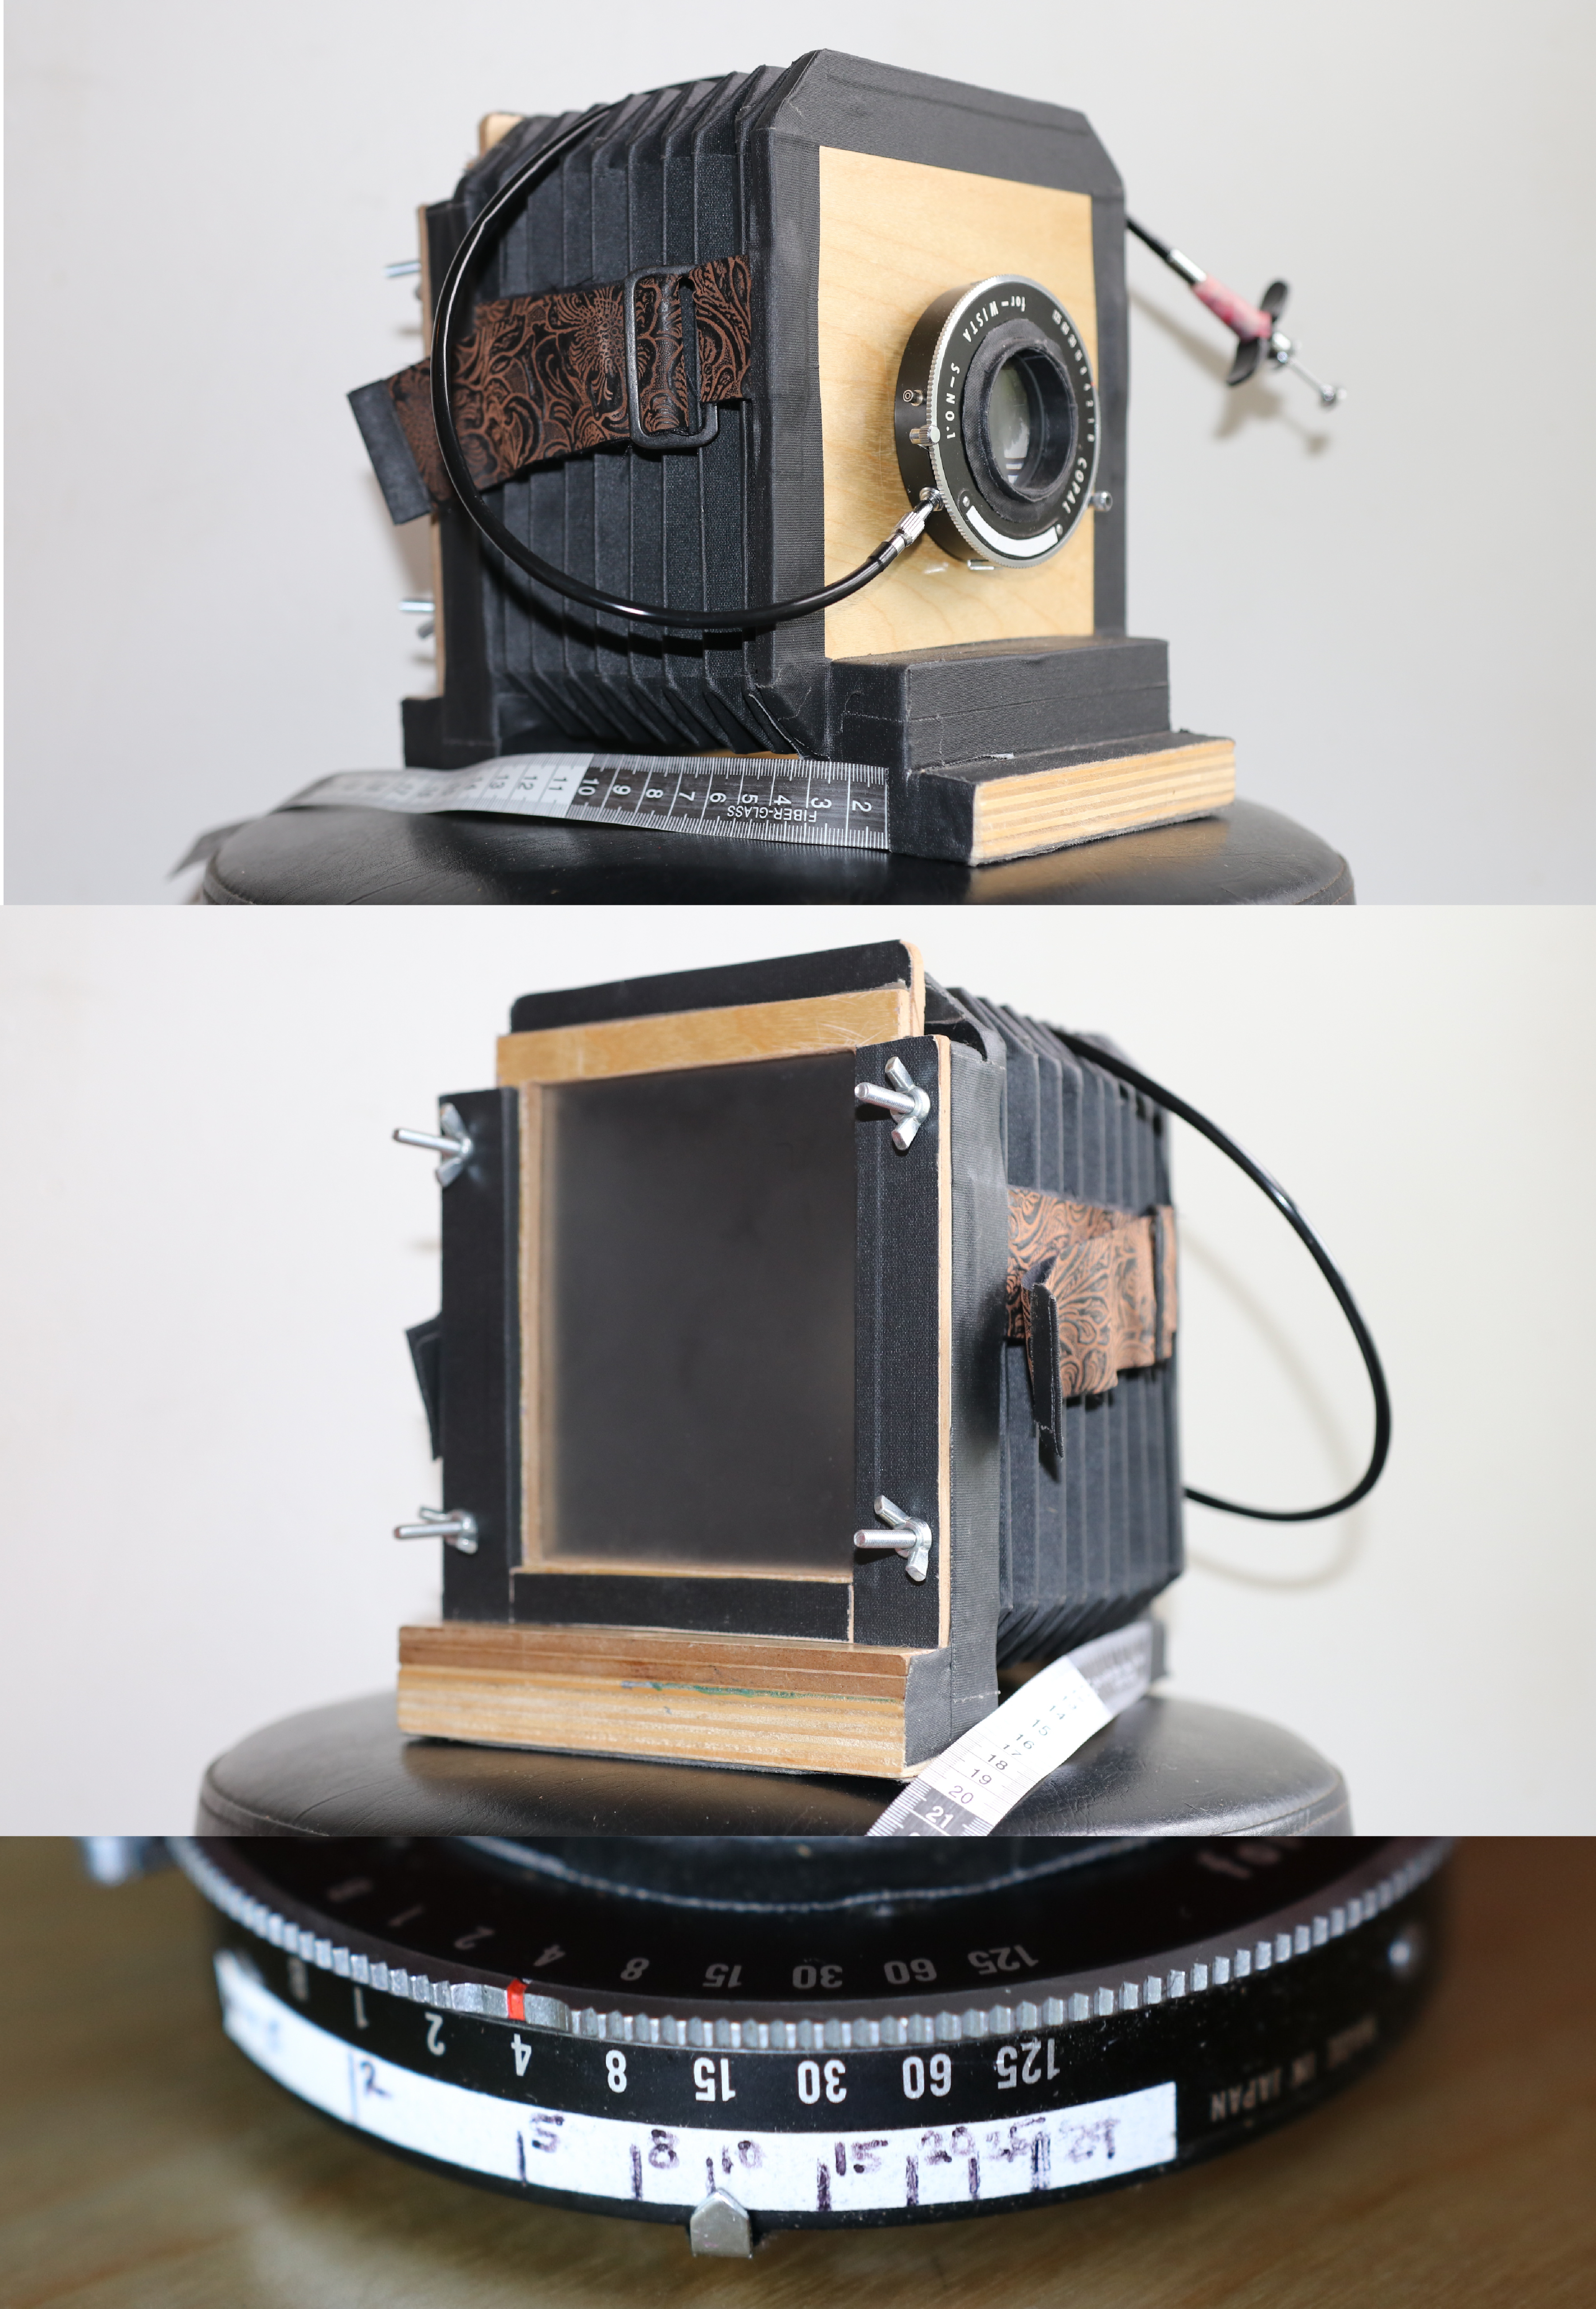 2022 design: tape reinforced cardstock bellows, plywood lens board, and repurposed enlarger shutter. Lens is a double-convex magnifying glass.